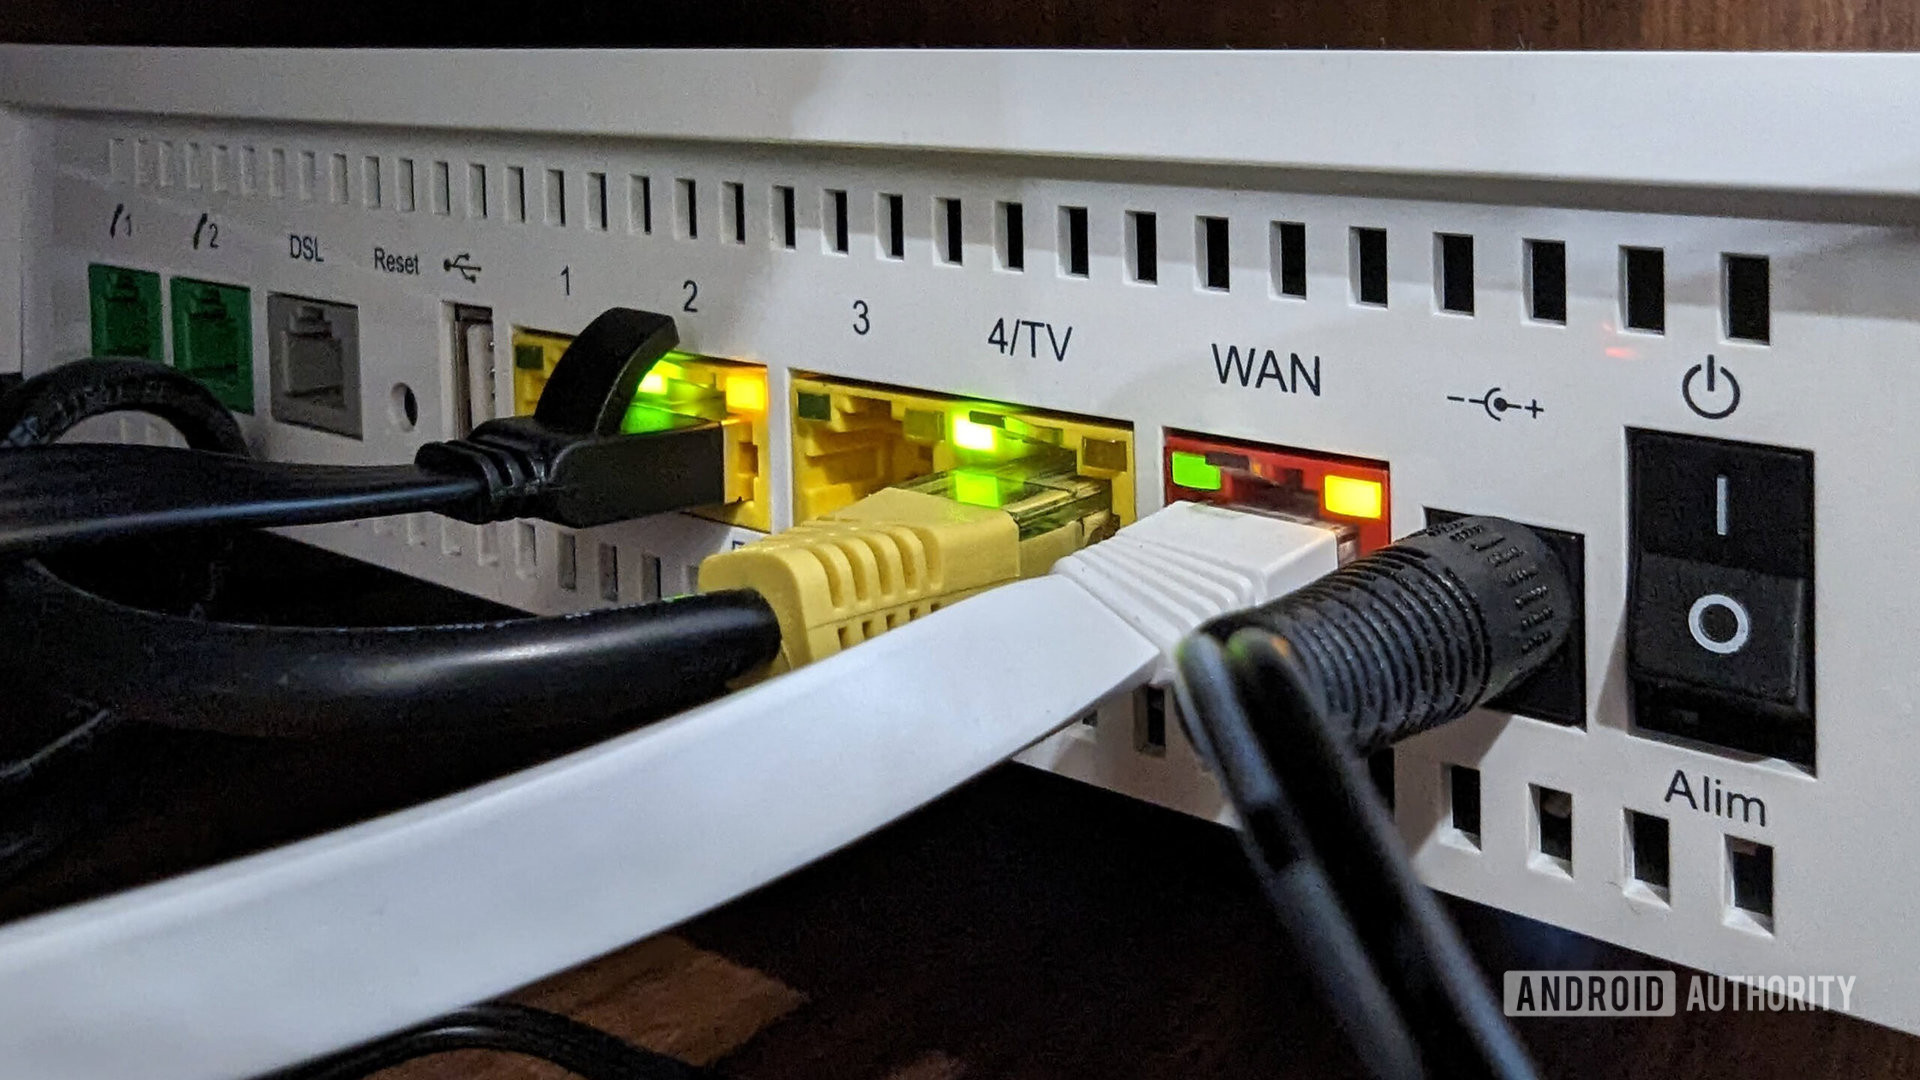 Router ports with Ethernet cables plugged in